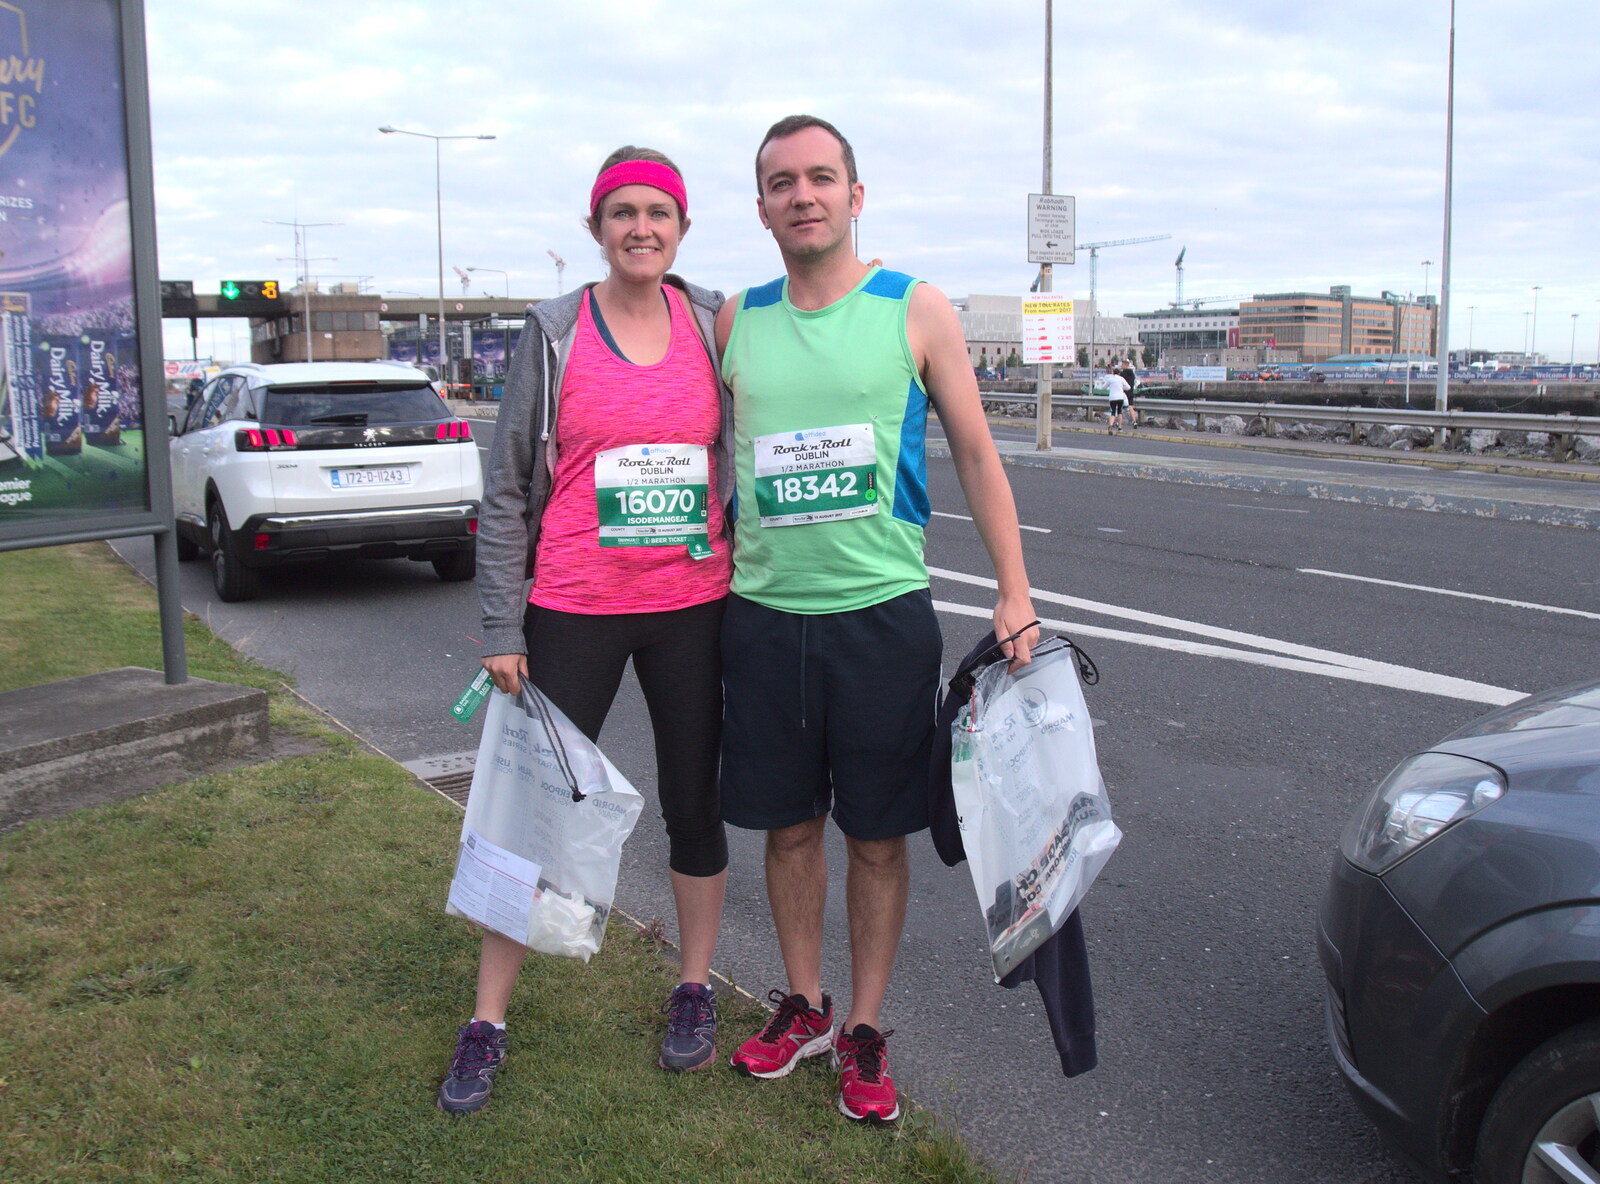 Isobel and James by East Point tolls at 7am from Isobel's Rock'n'Roll Half Marathon, Dublin, Ireland - 13th August 2017